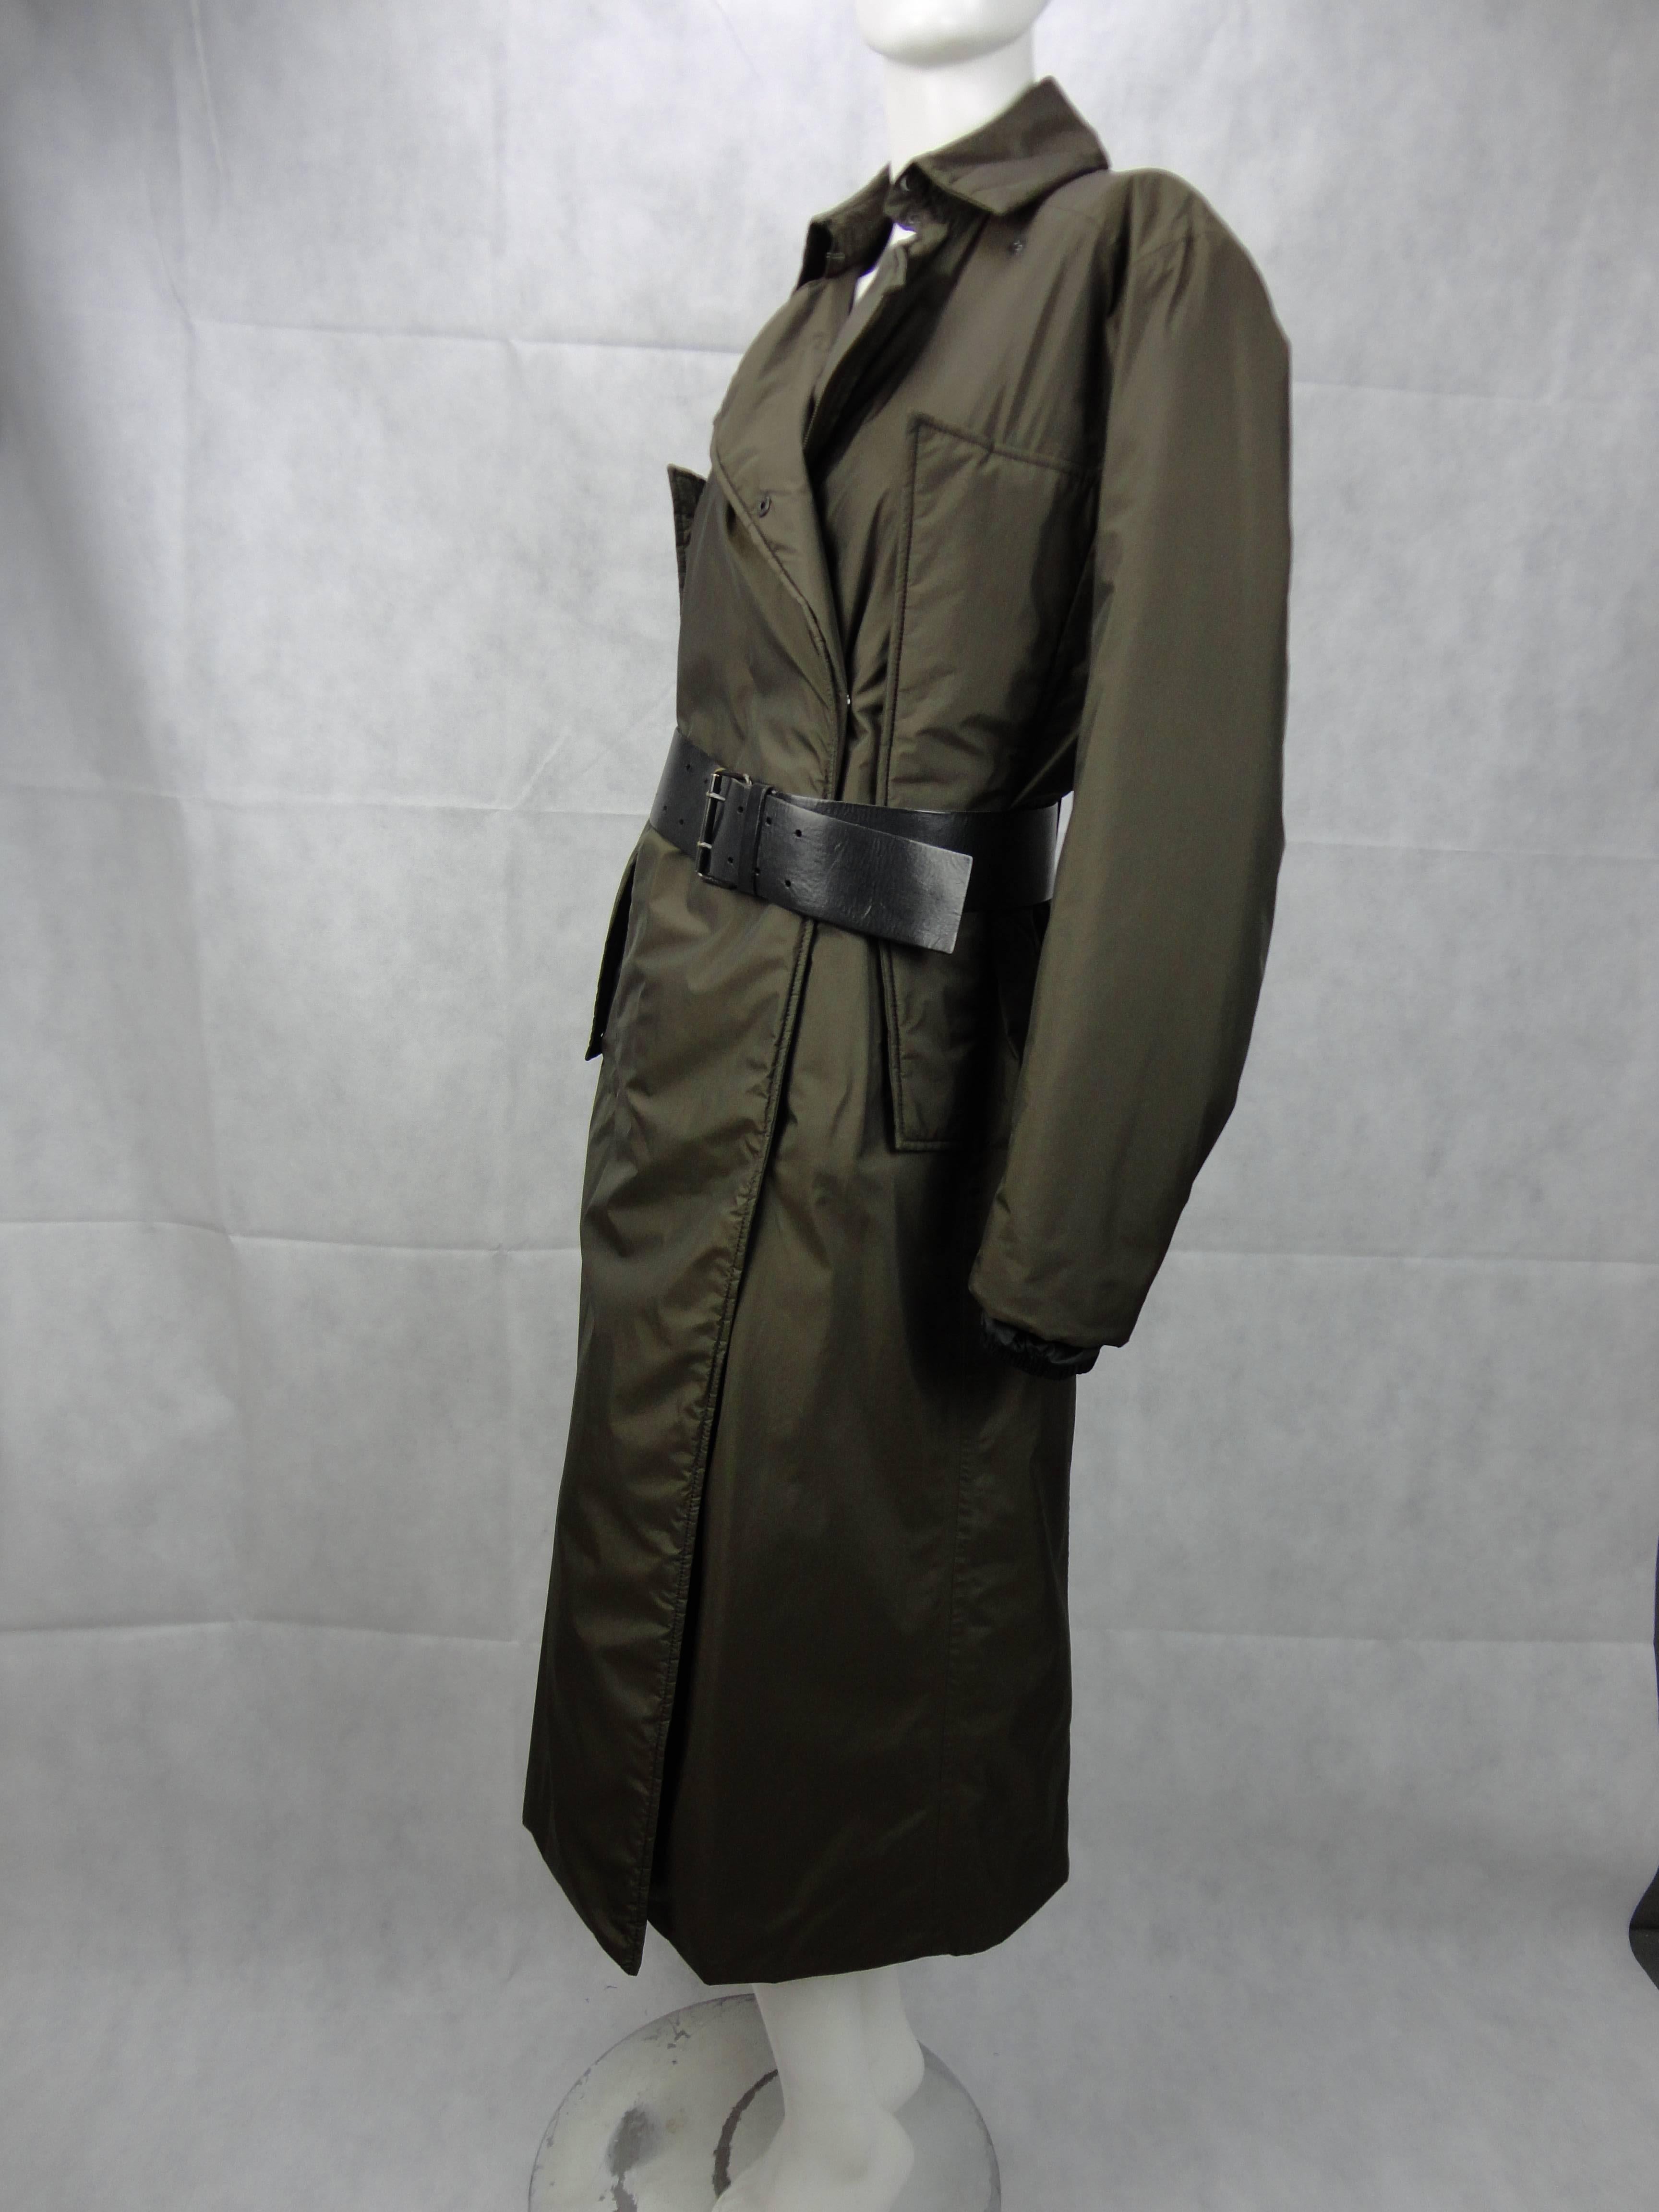 Prada dark green long coat with black leather belt. 
A lot of secret pockets so it is very practical. 
Very warm, perfect for winter. 
Lenght 120 cms 
Shoulder 42 cms 
Chest 52 cms 
Sleeve 61,5 cms

